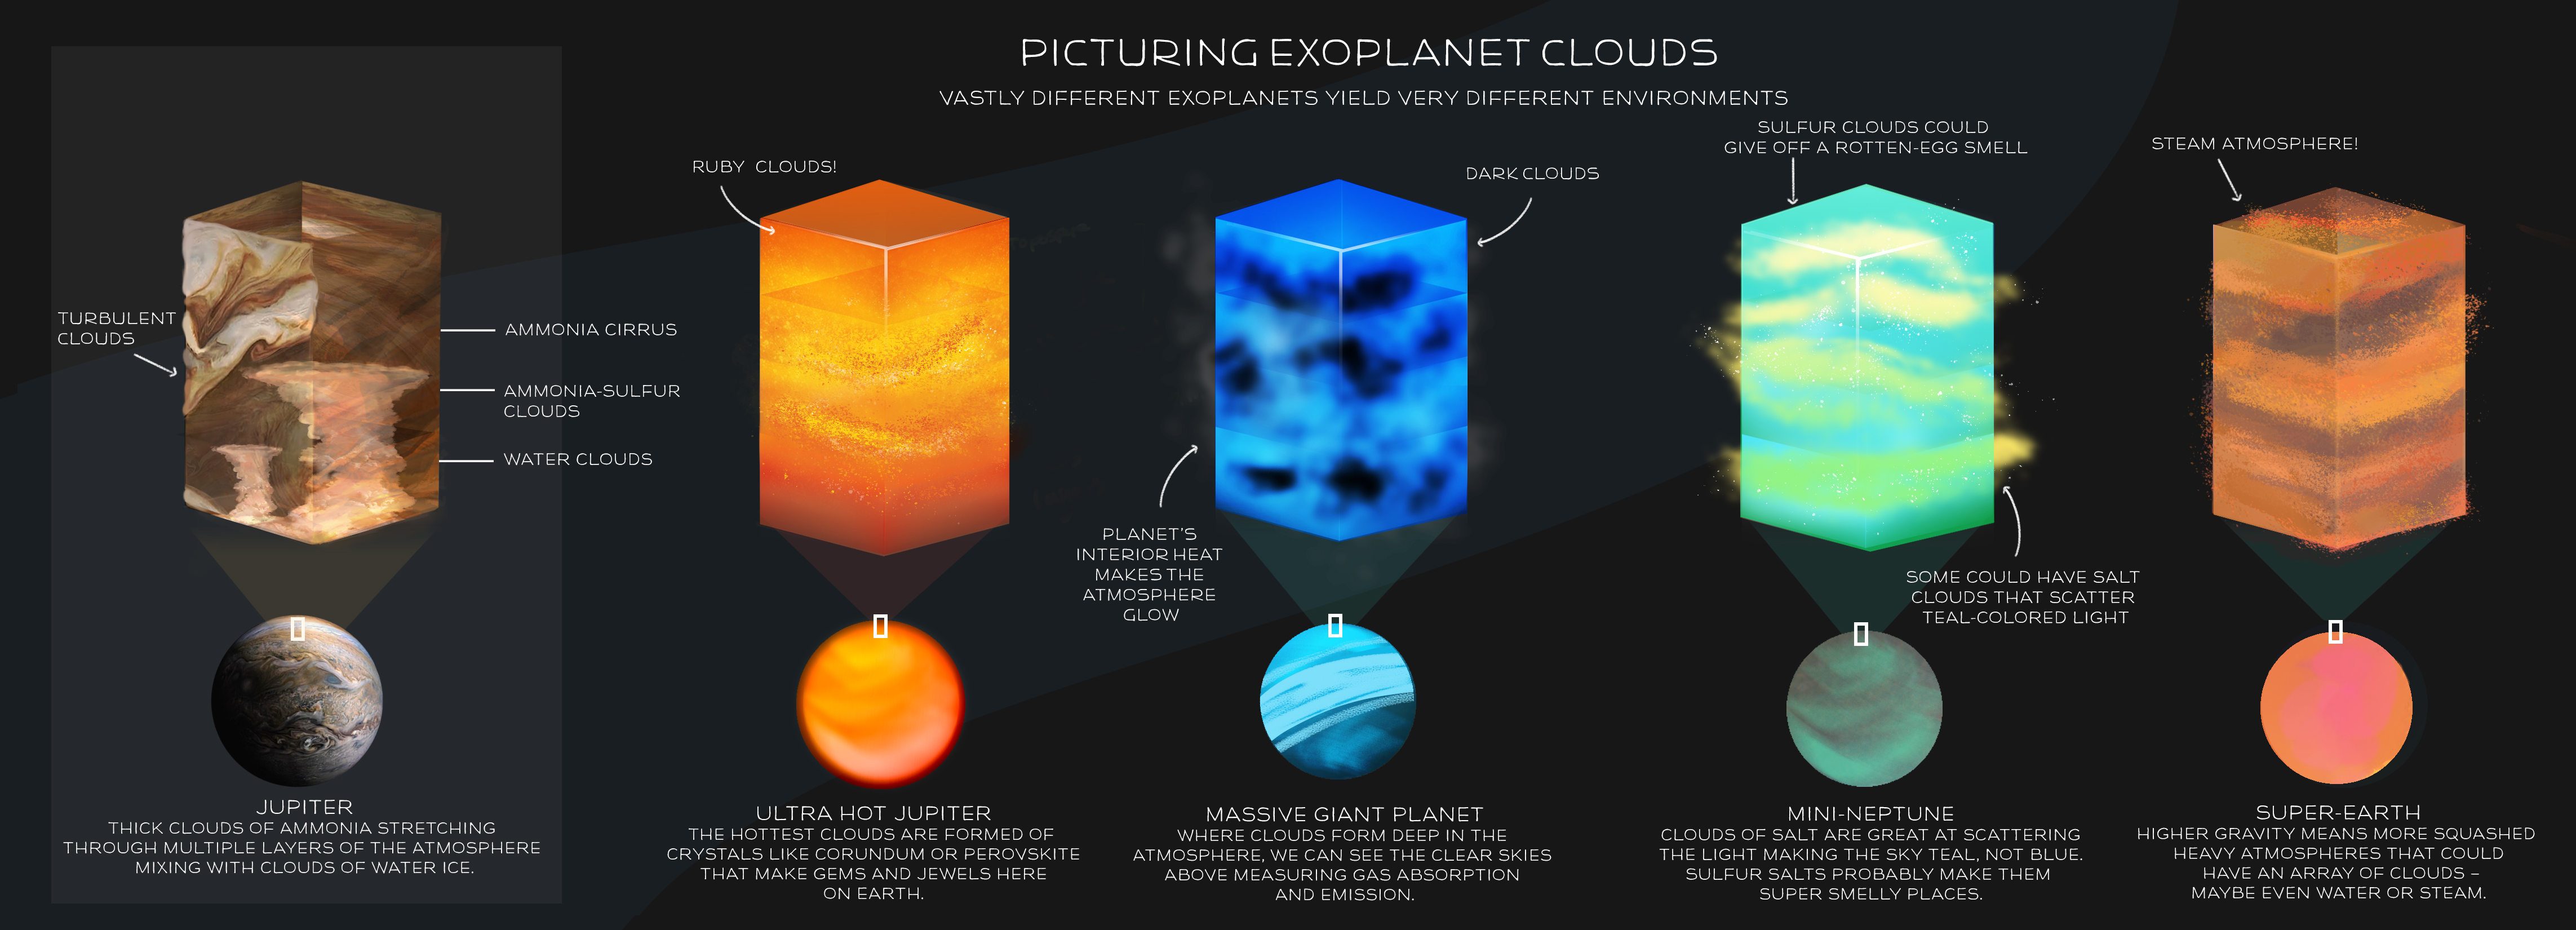 Illustration of cross sections of possible exoplanet atmospheres, showing clouds, structure and composition.